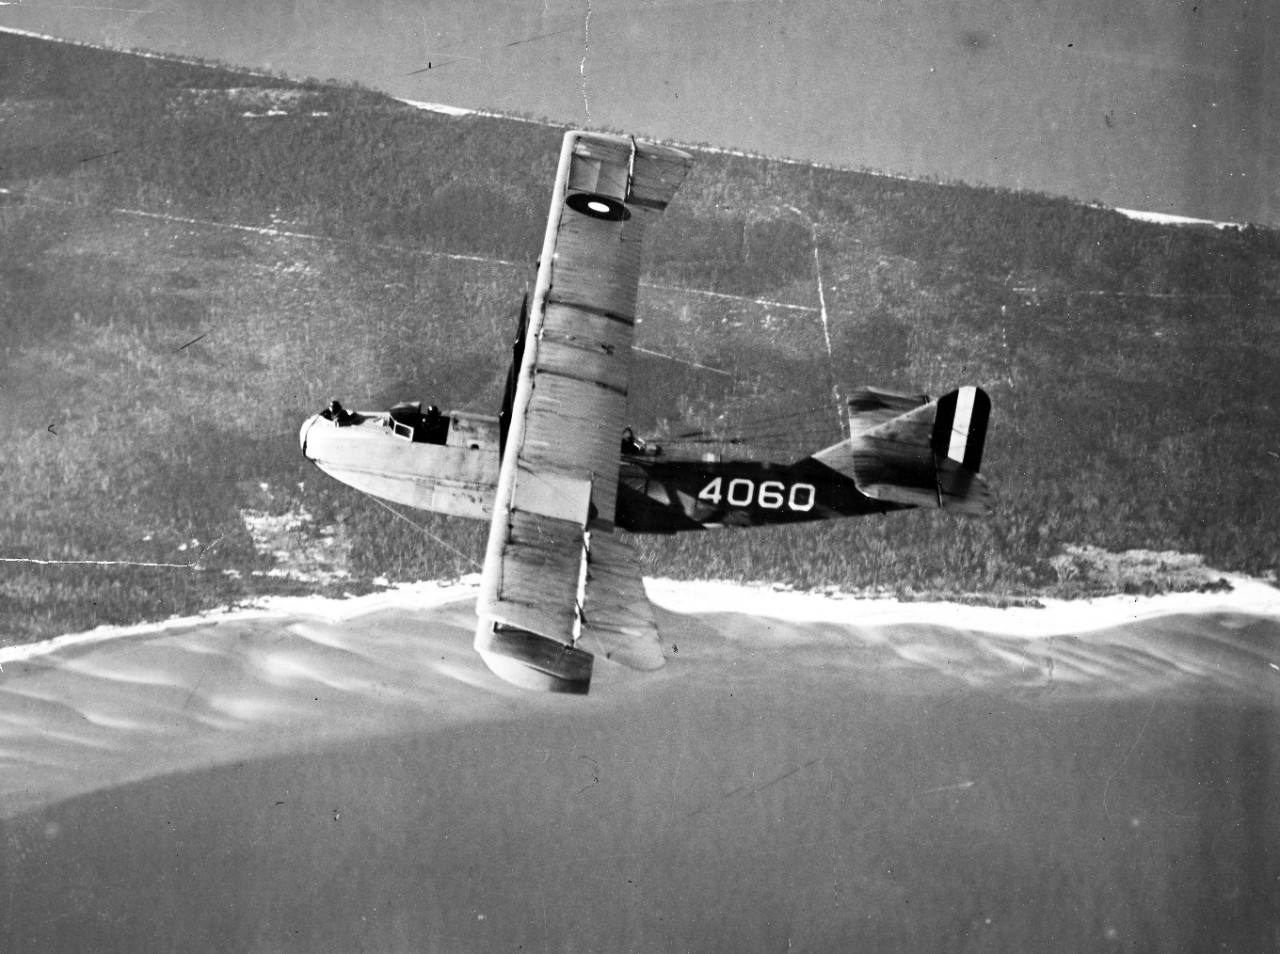 Two photos of US Navy aircraft in flight, circa 1918-1919, including: Curtiss/Burgess N-9/N-9H (Bu# A2505) looping inverted over an air station and Curtiss H-16 seaplane (Bu# A4060) flying over a coastline.